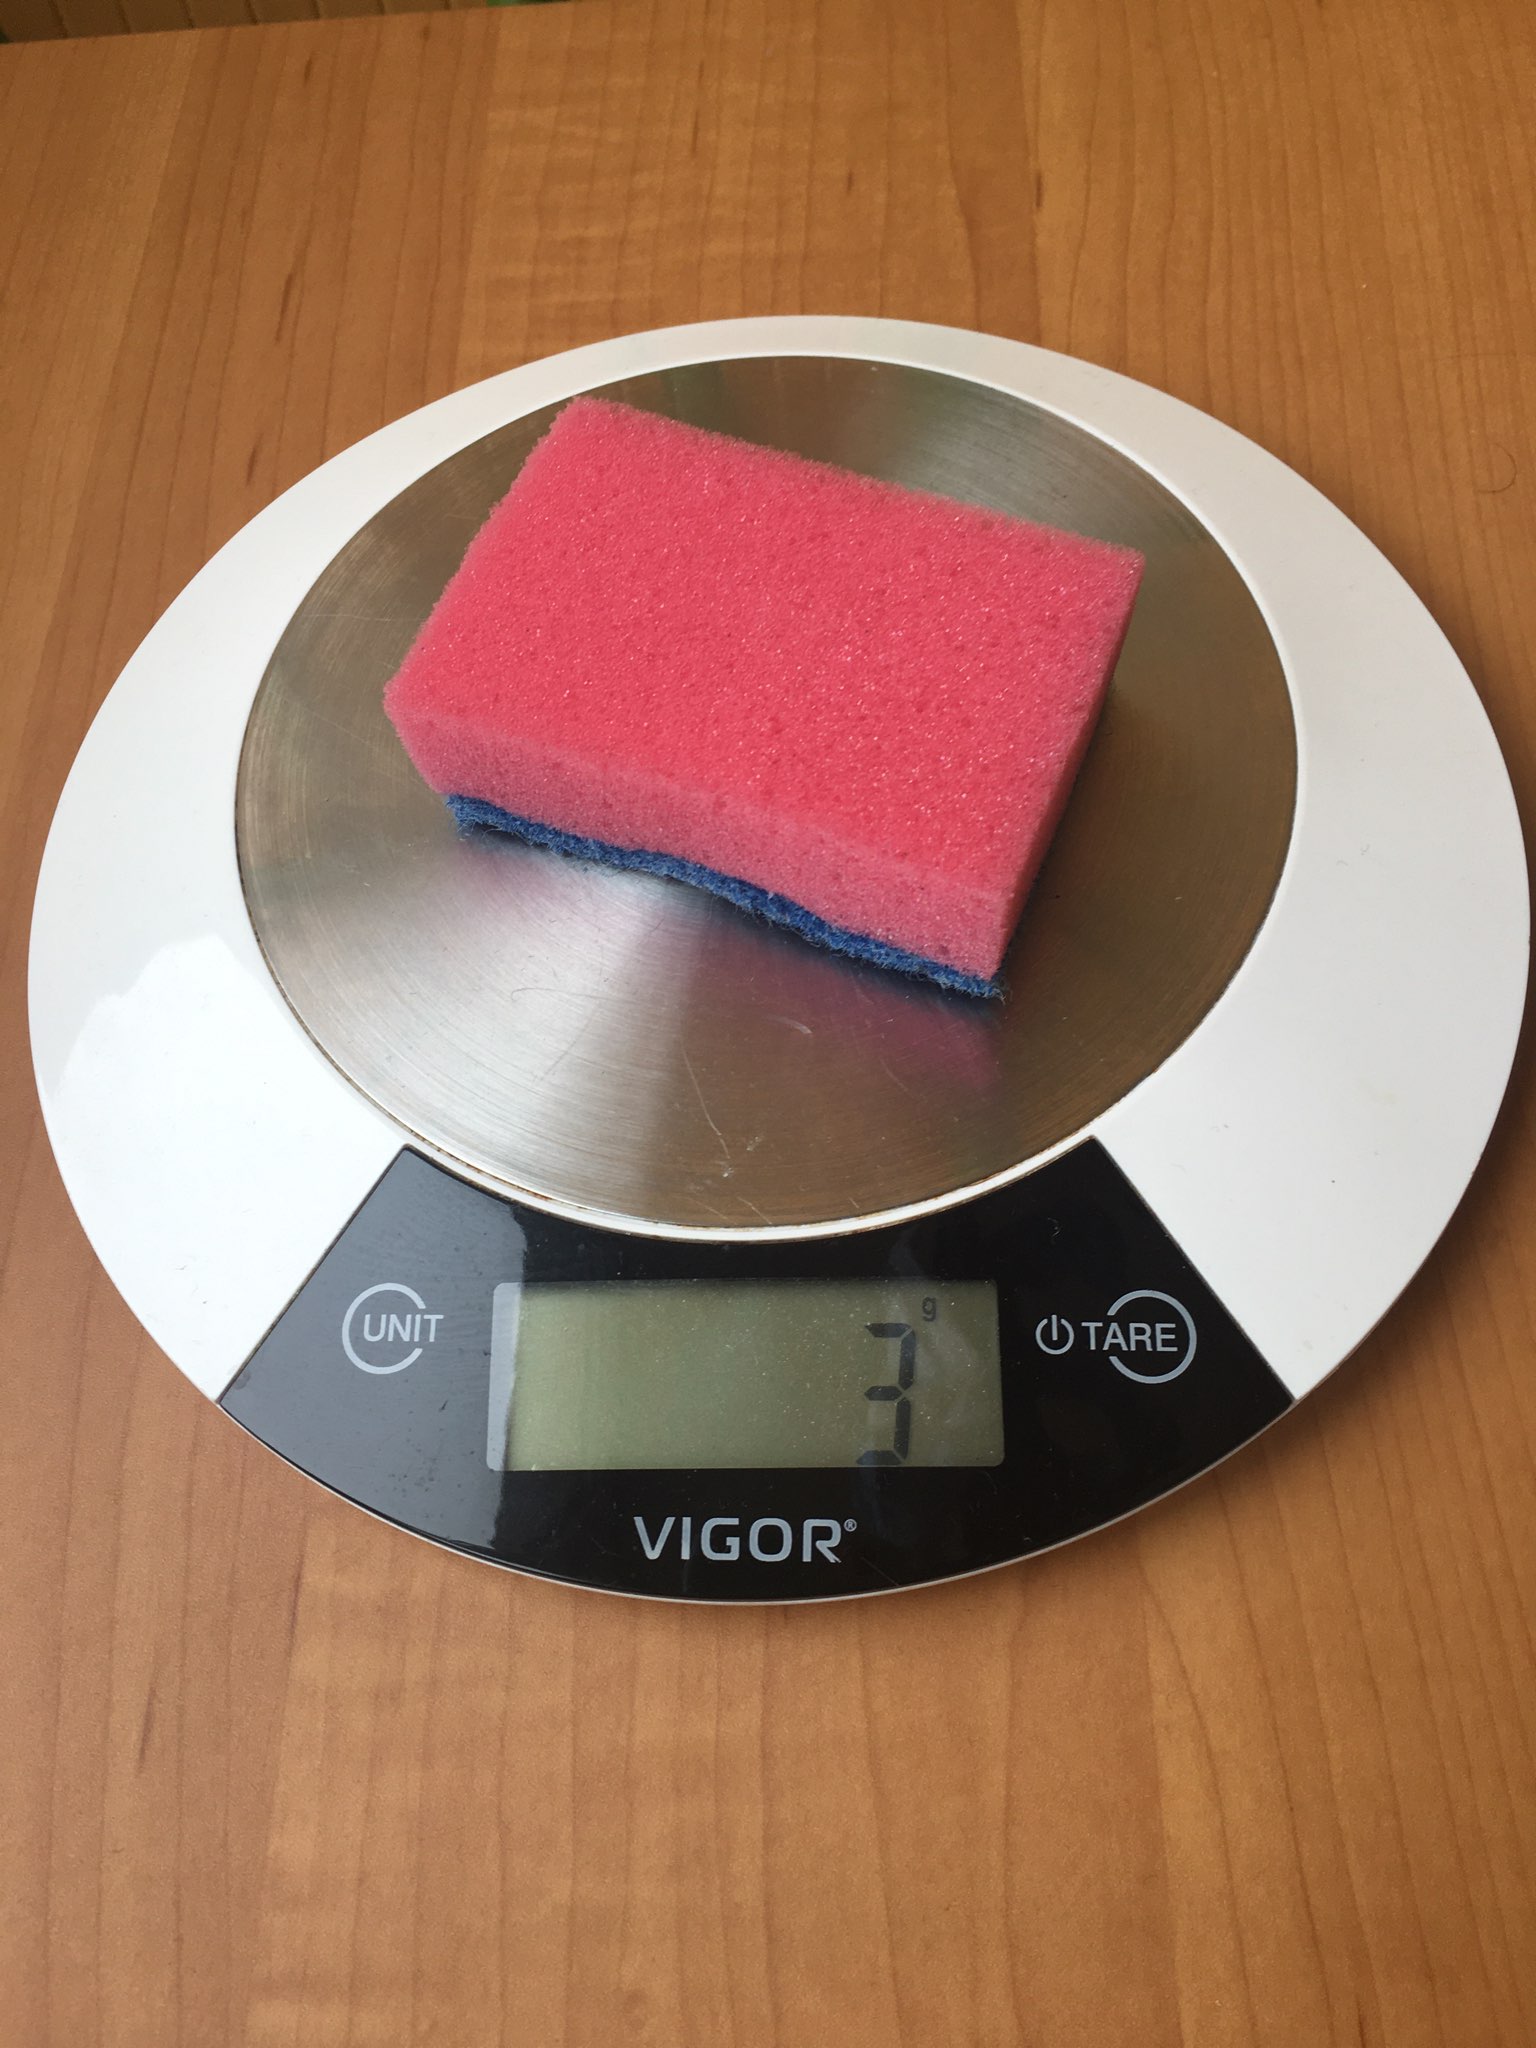 How much does a dish washing sponge weigh?